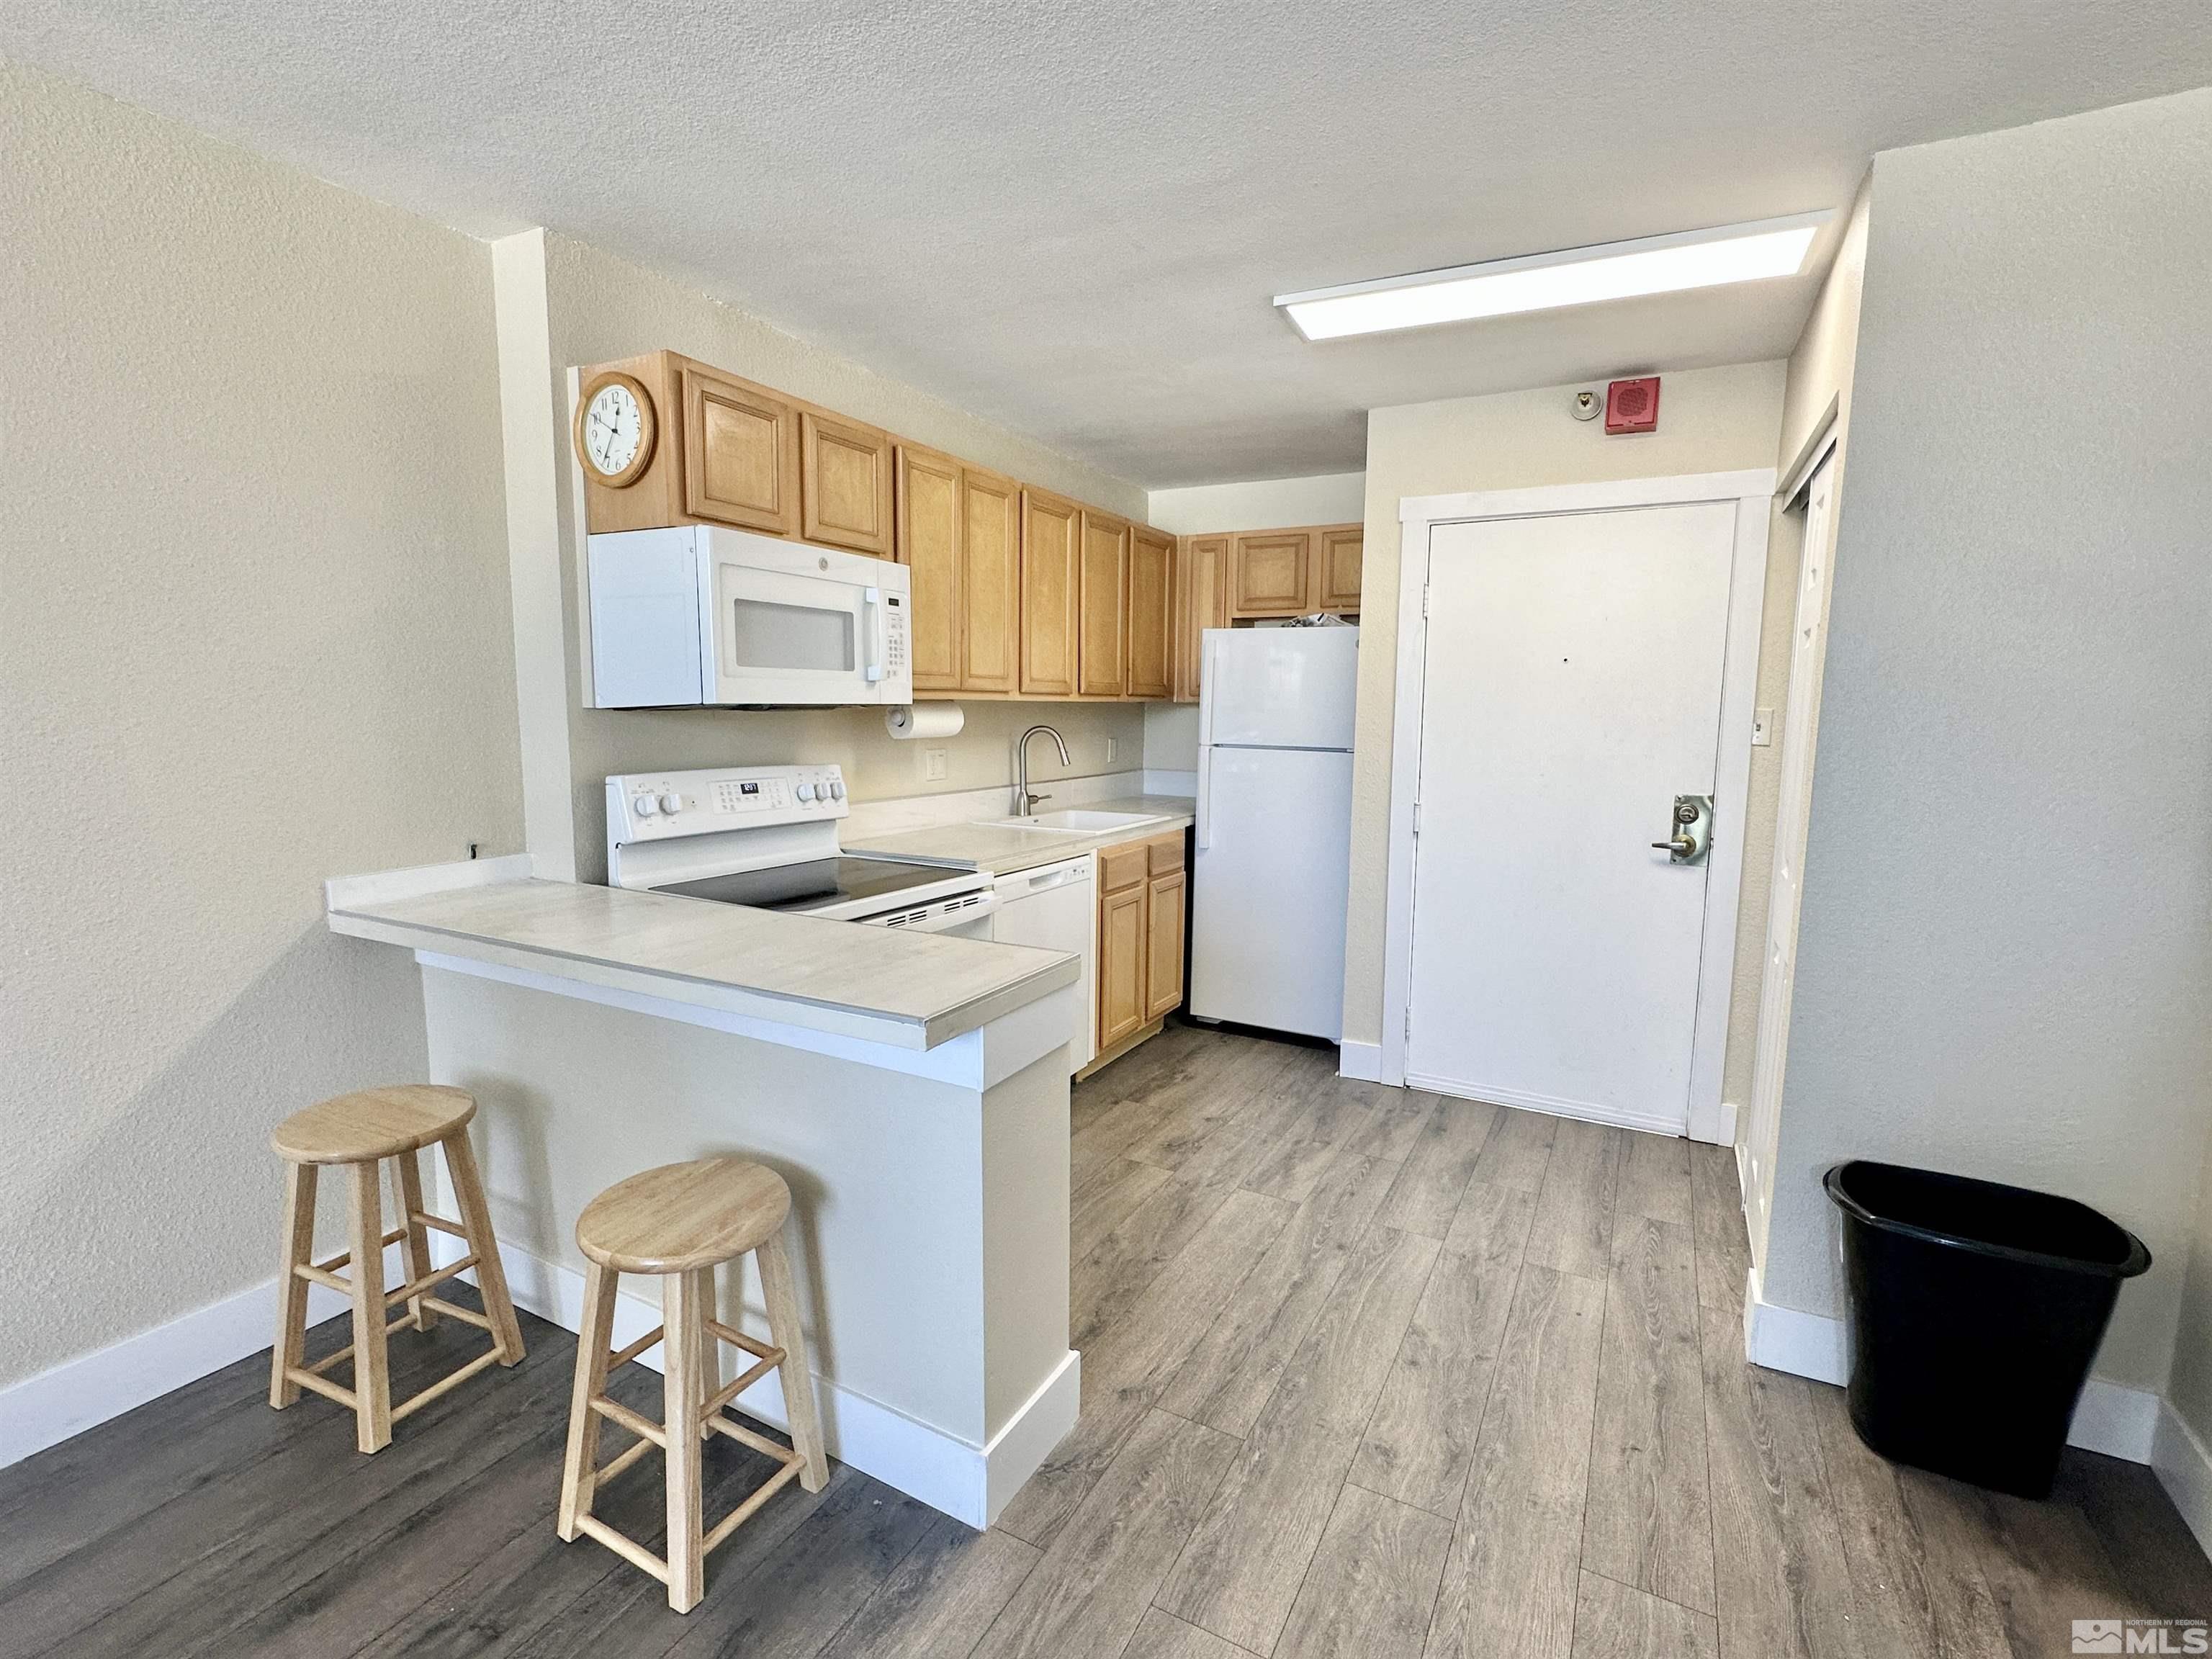 More Details about MLS # 230010714 : 567 W 4TH ST #506